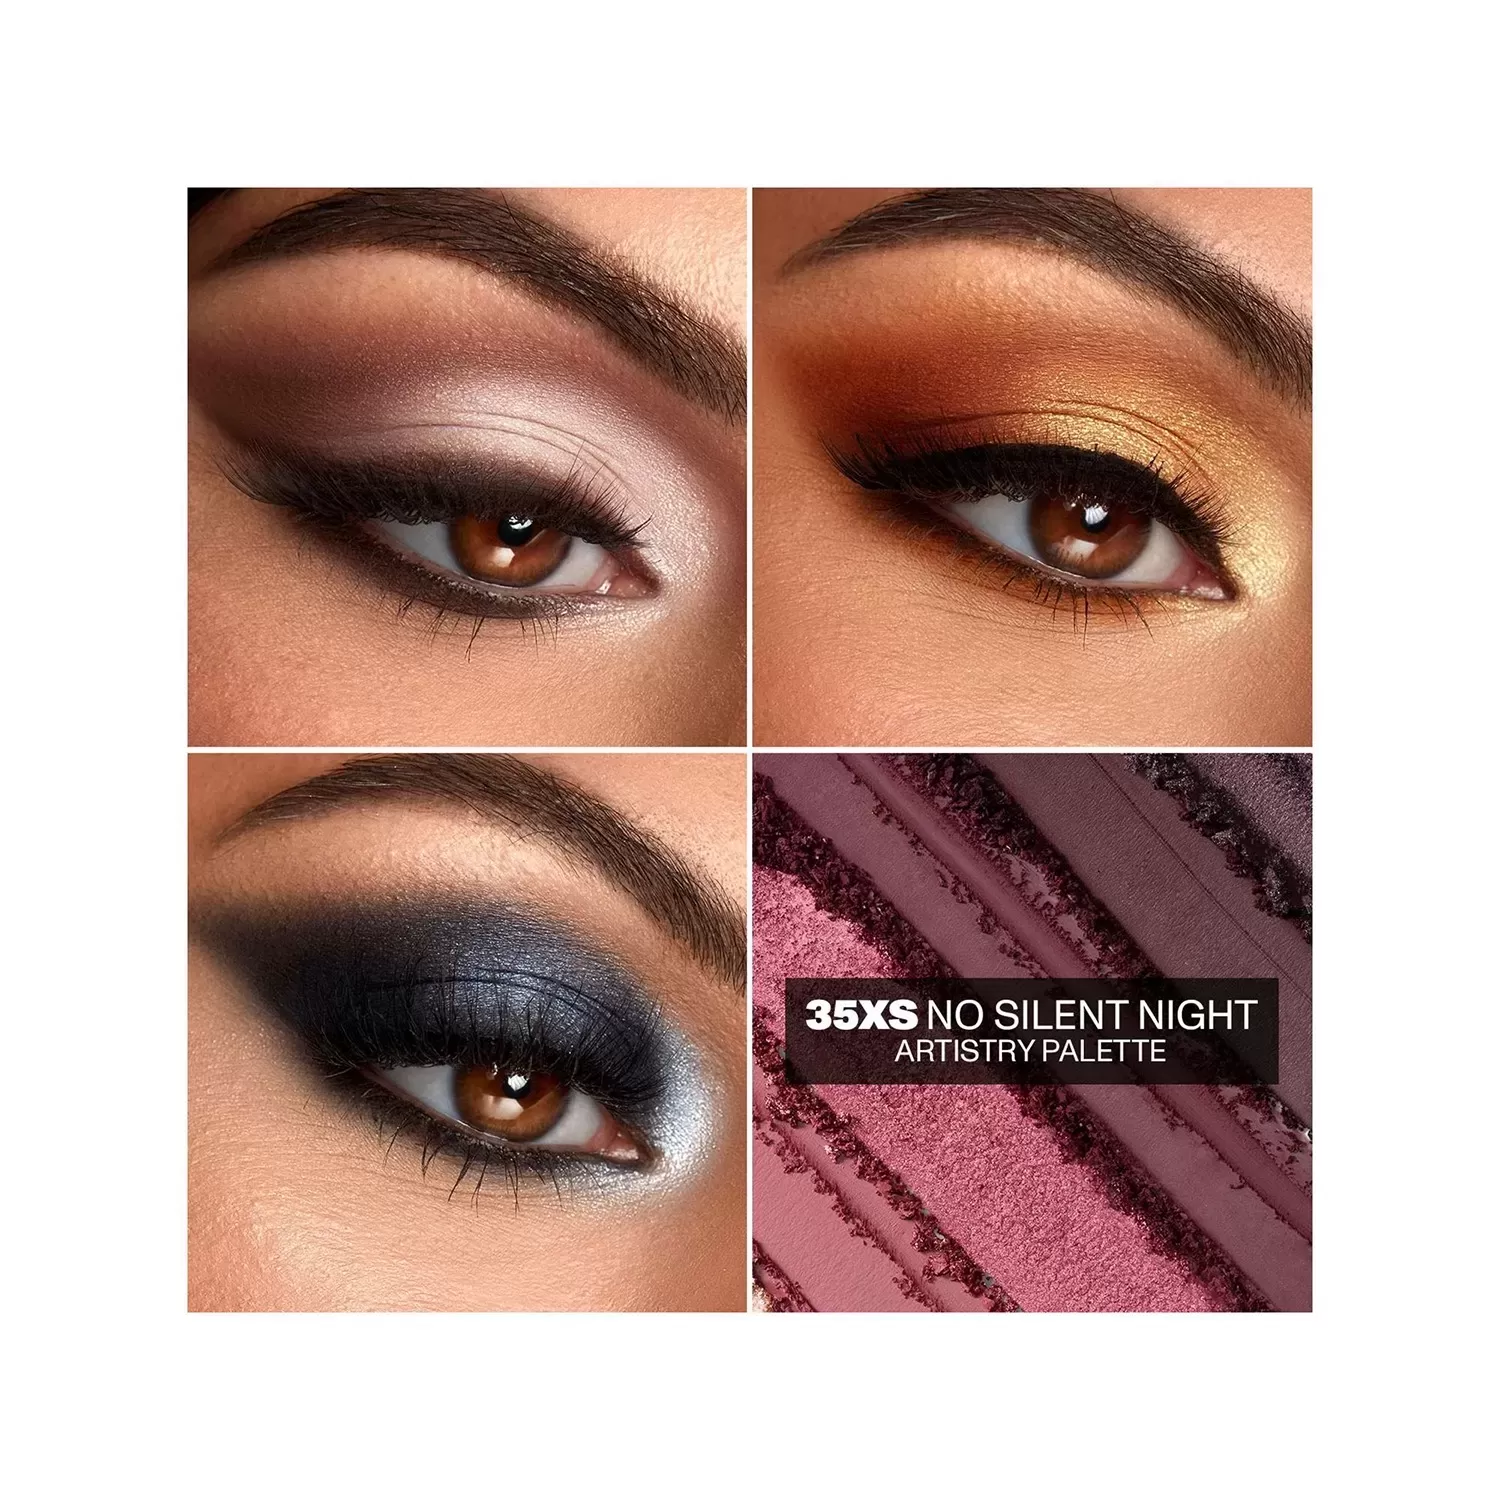 before after Eyeshadow Palette MORPHE 35XS NO SILENT NIGHTS Artistry Palette